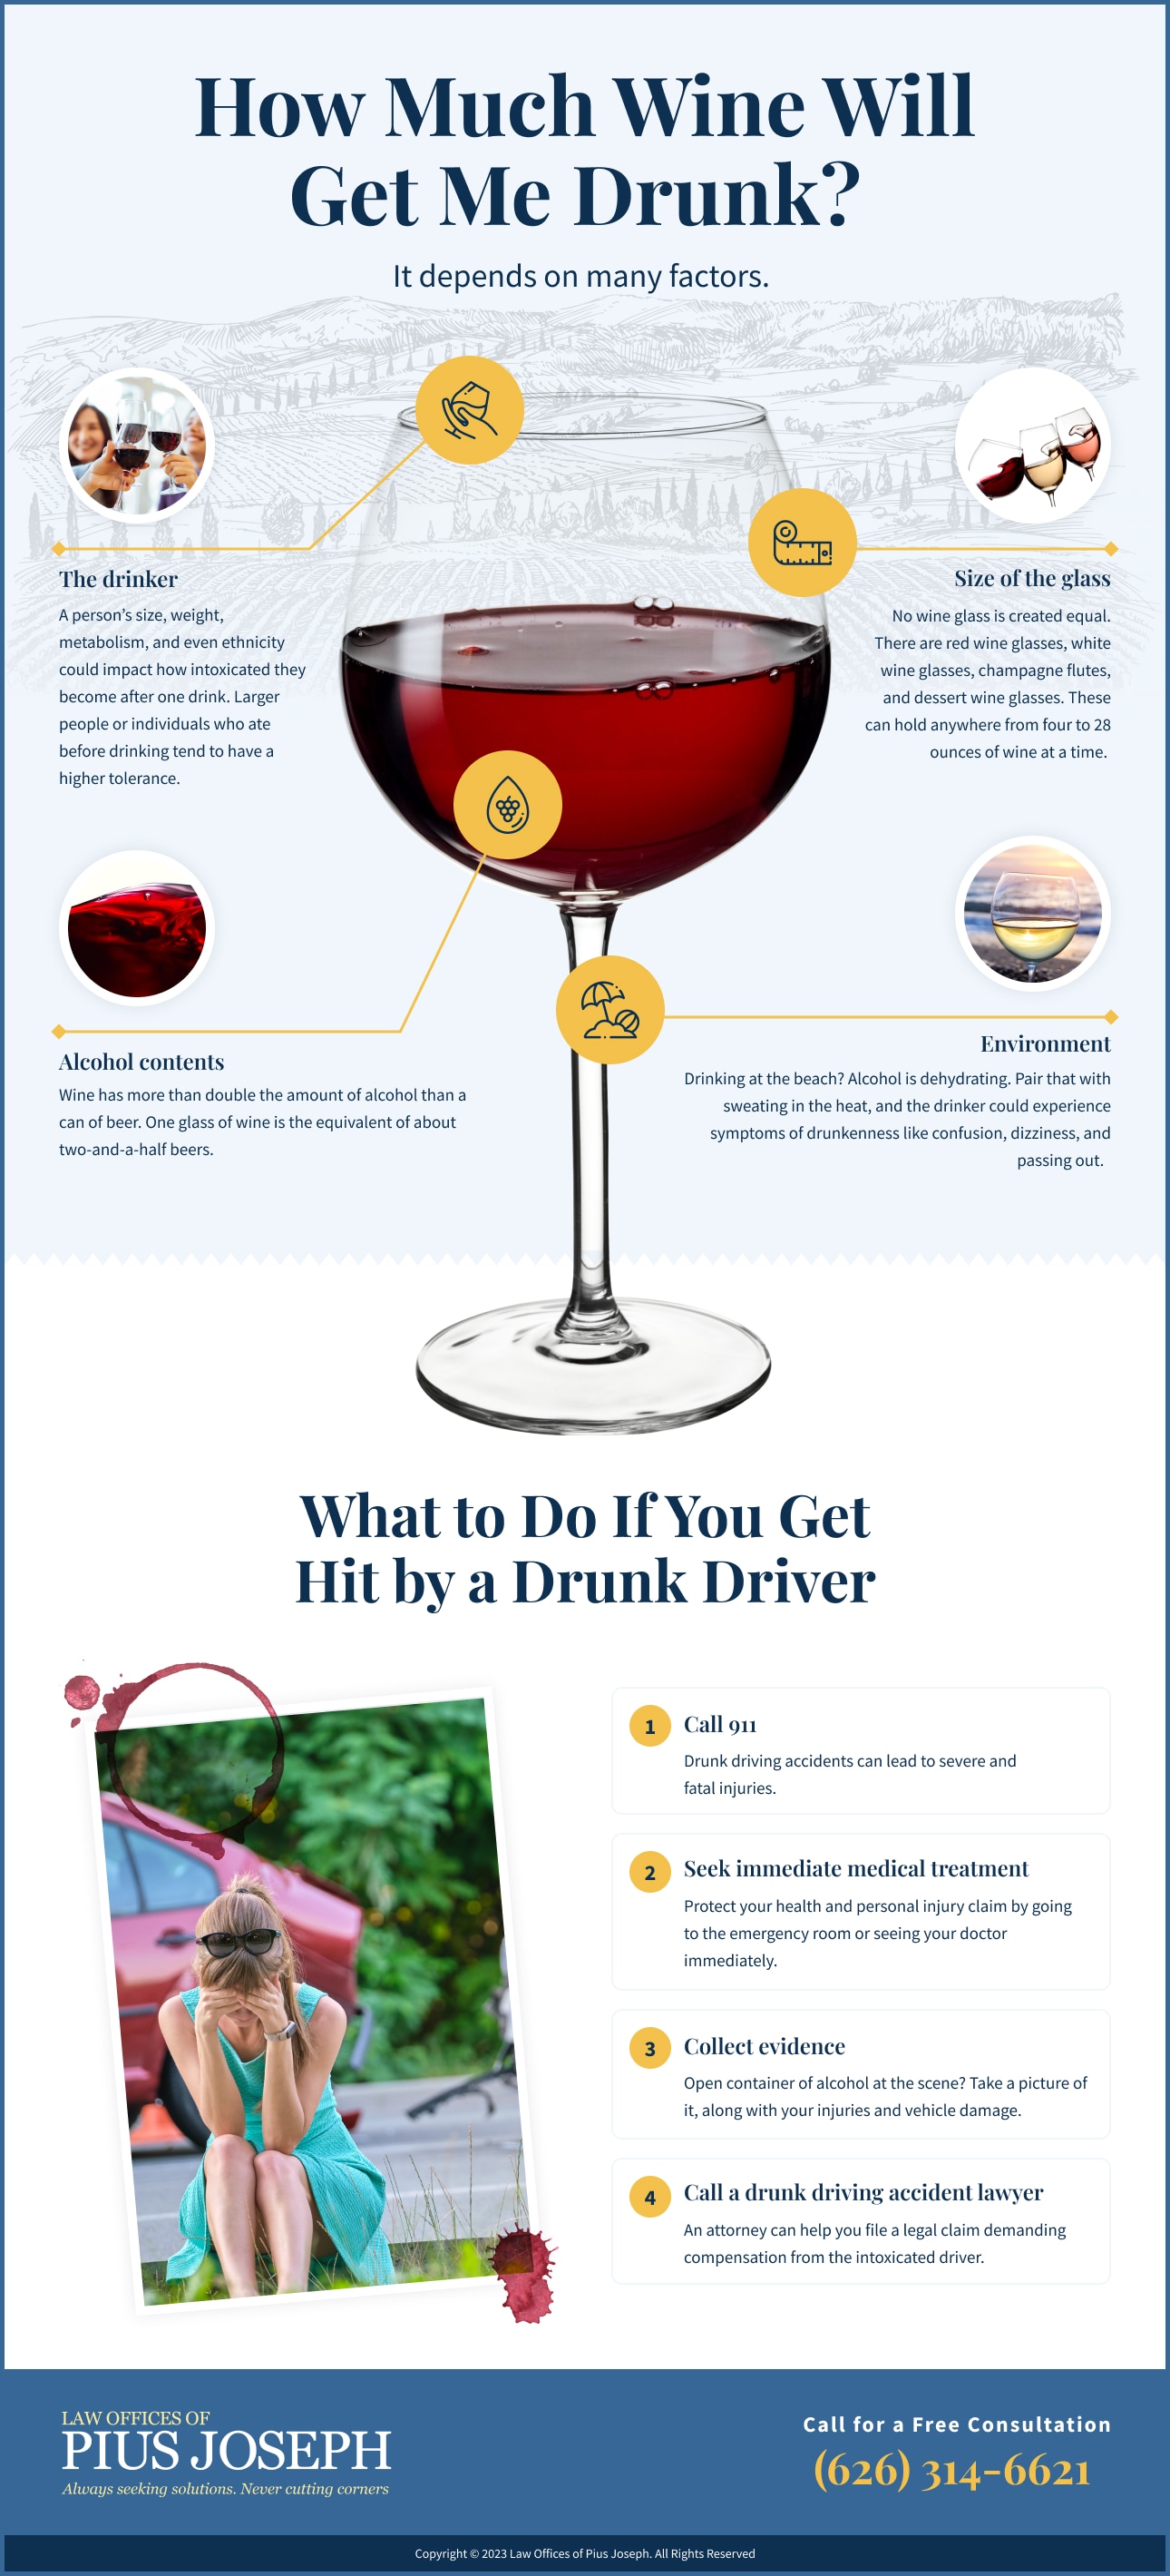 How much wine will get me drunk infographic